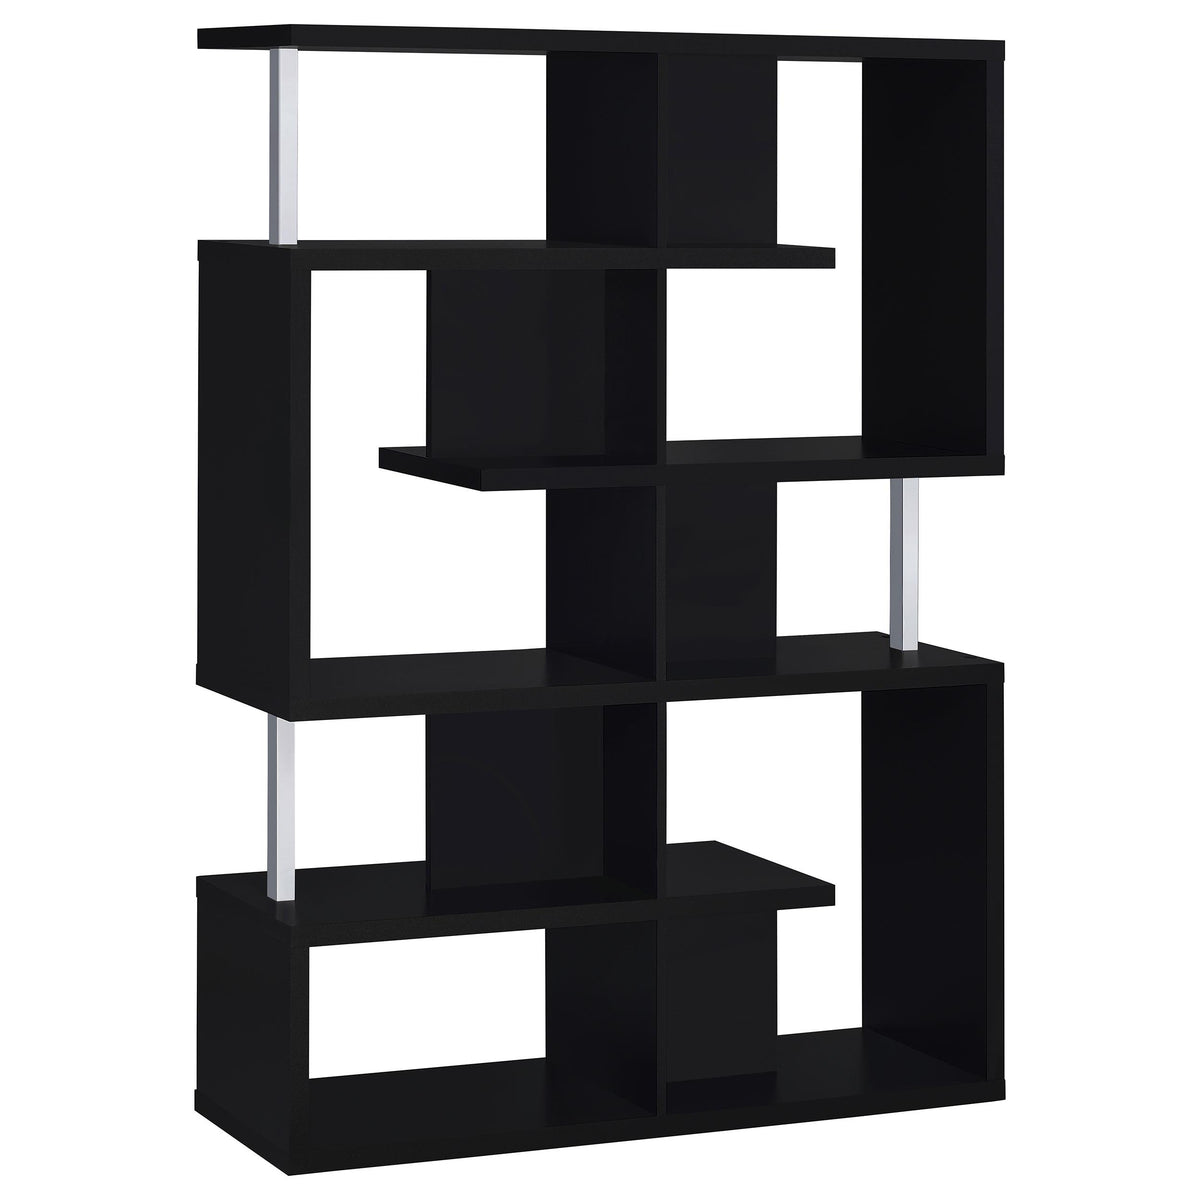 Hoover 5-tier Bookcase Black and Chrome  Half Price Furniture